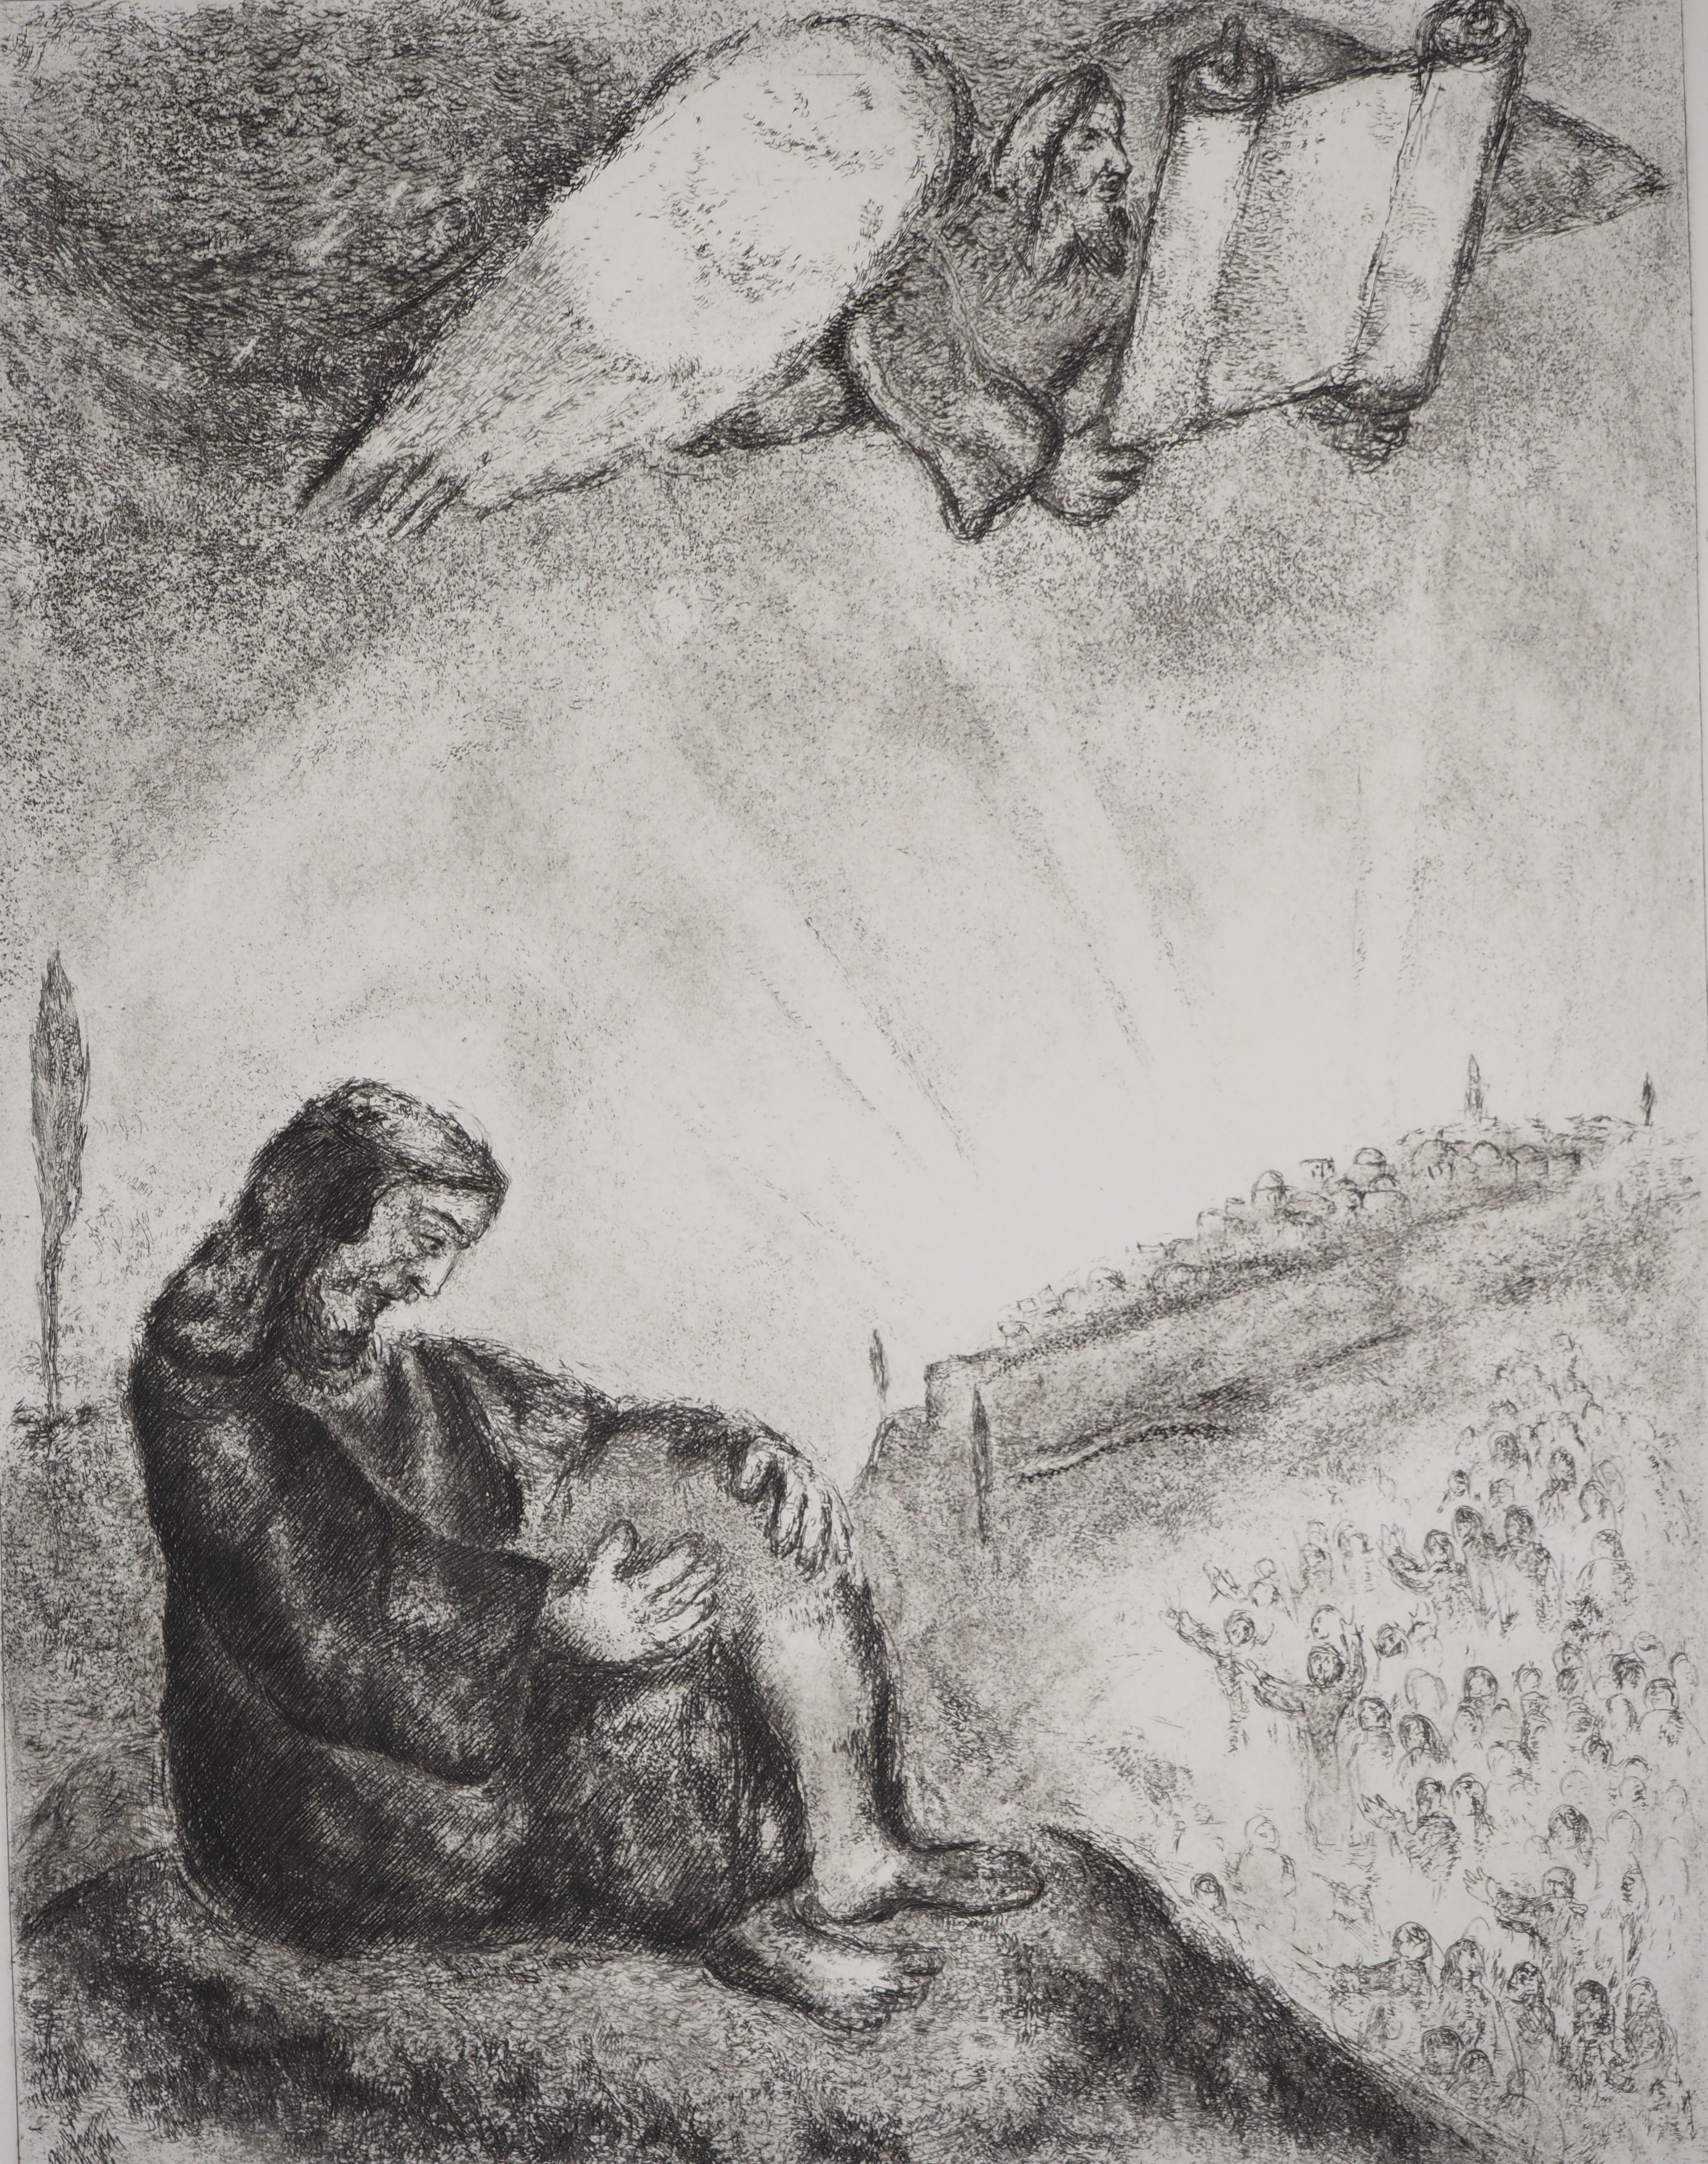 Marc Chagall (1887-1958)
Bible : Prophecy about Jerusalem (Prophétie sur Jérusalem), 1939

Original etching
Printed signature in the plate
On Montval vellum, 44 x 33.5 cm (c. 17.3 x 13.1 inch)

INFORMATION: Published by Vollard / Tériade in